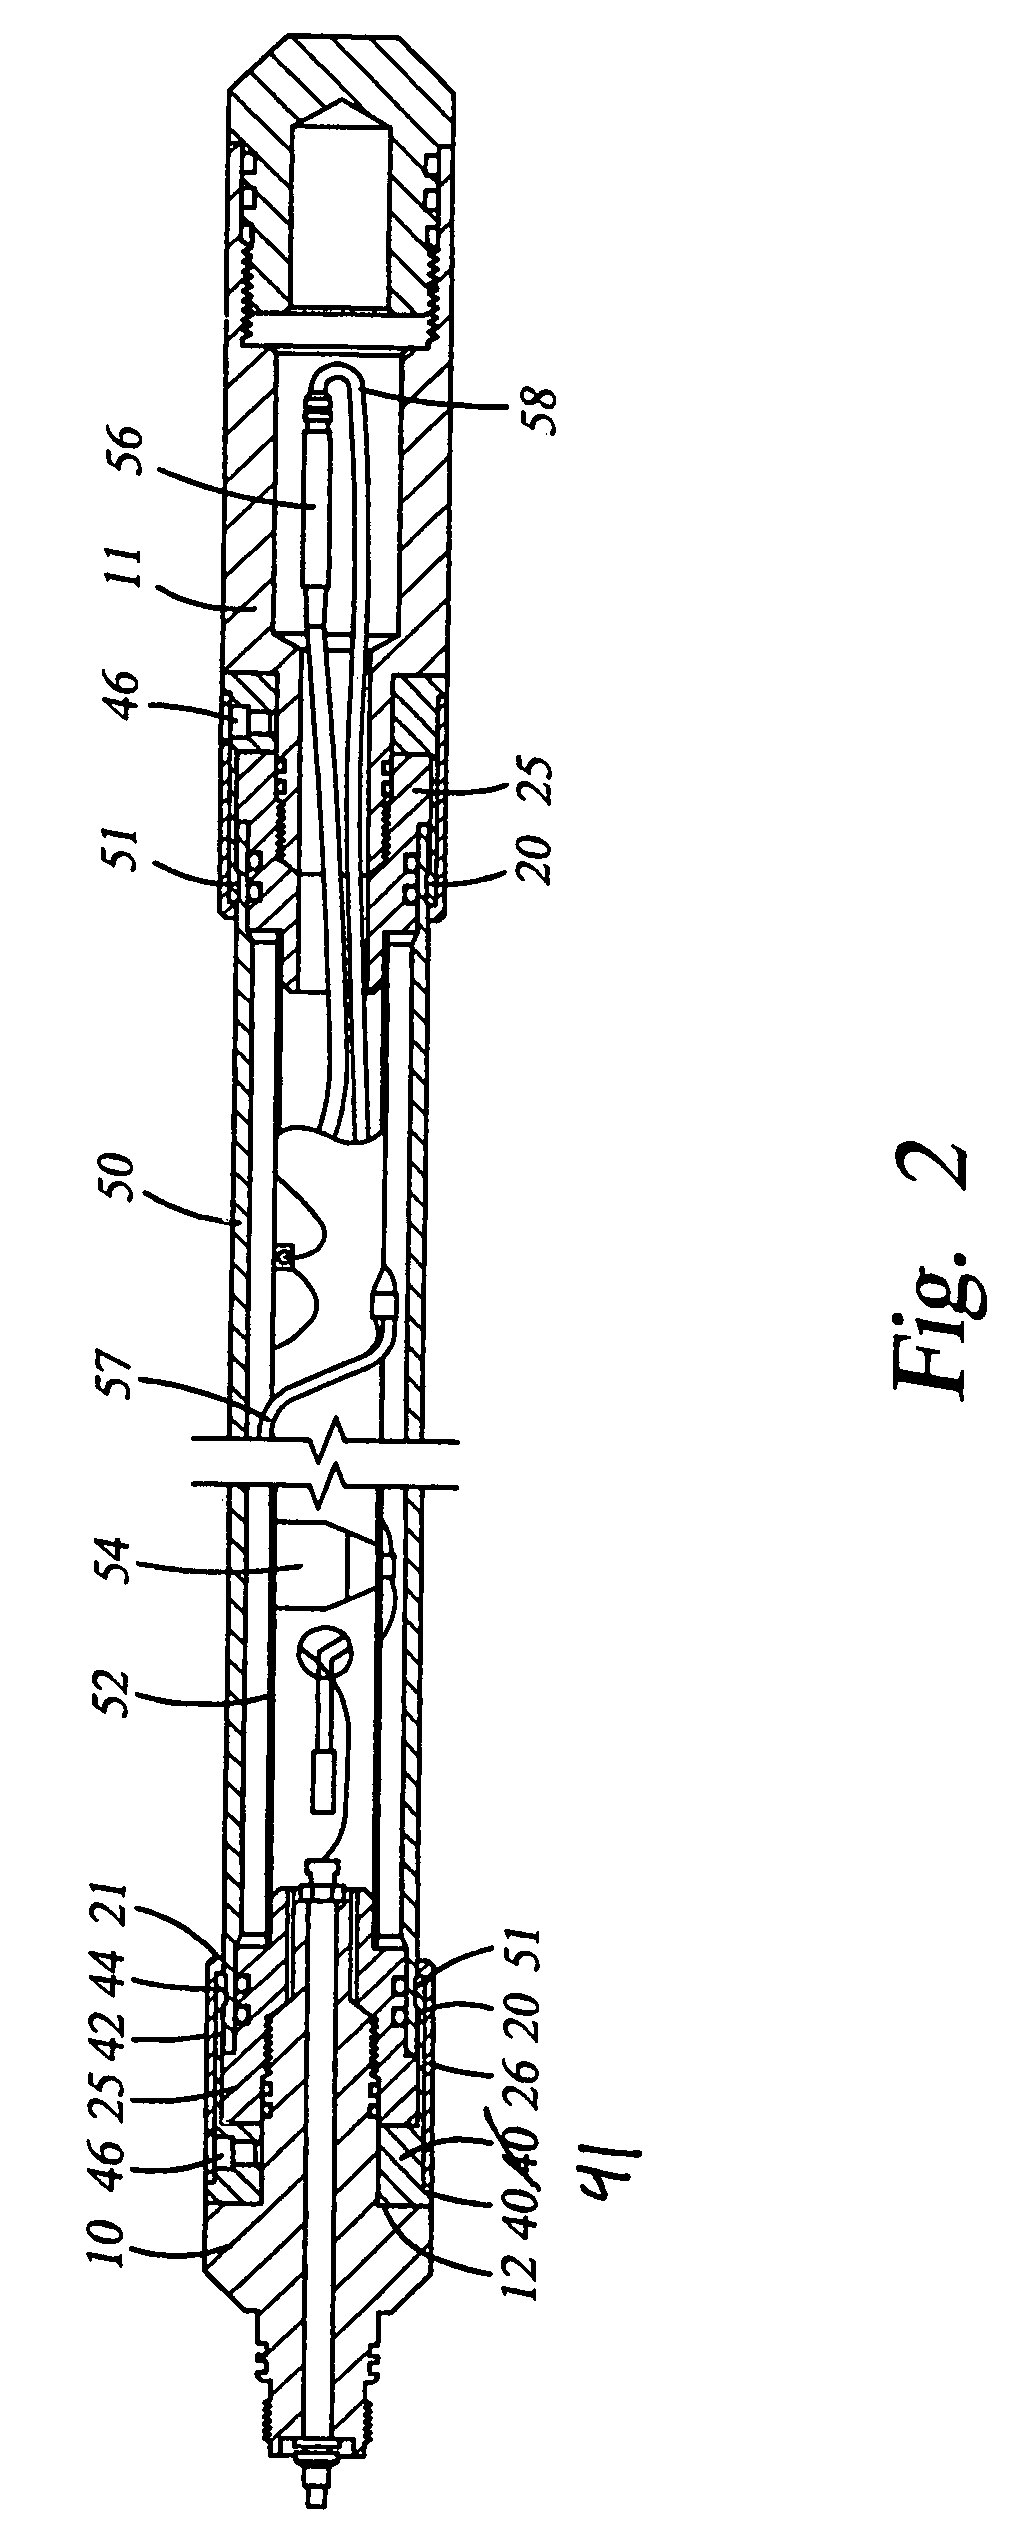 Perforating gun quick connection system